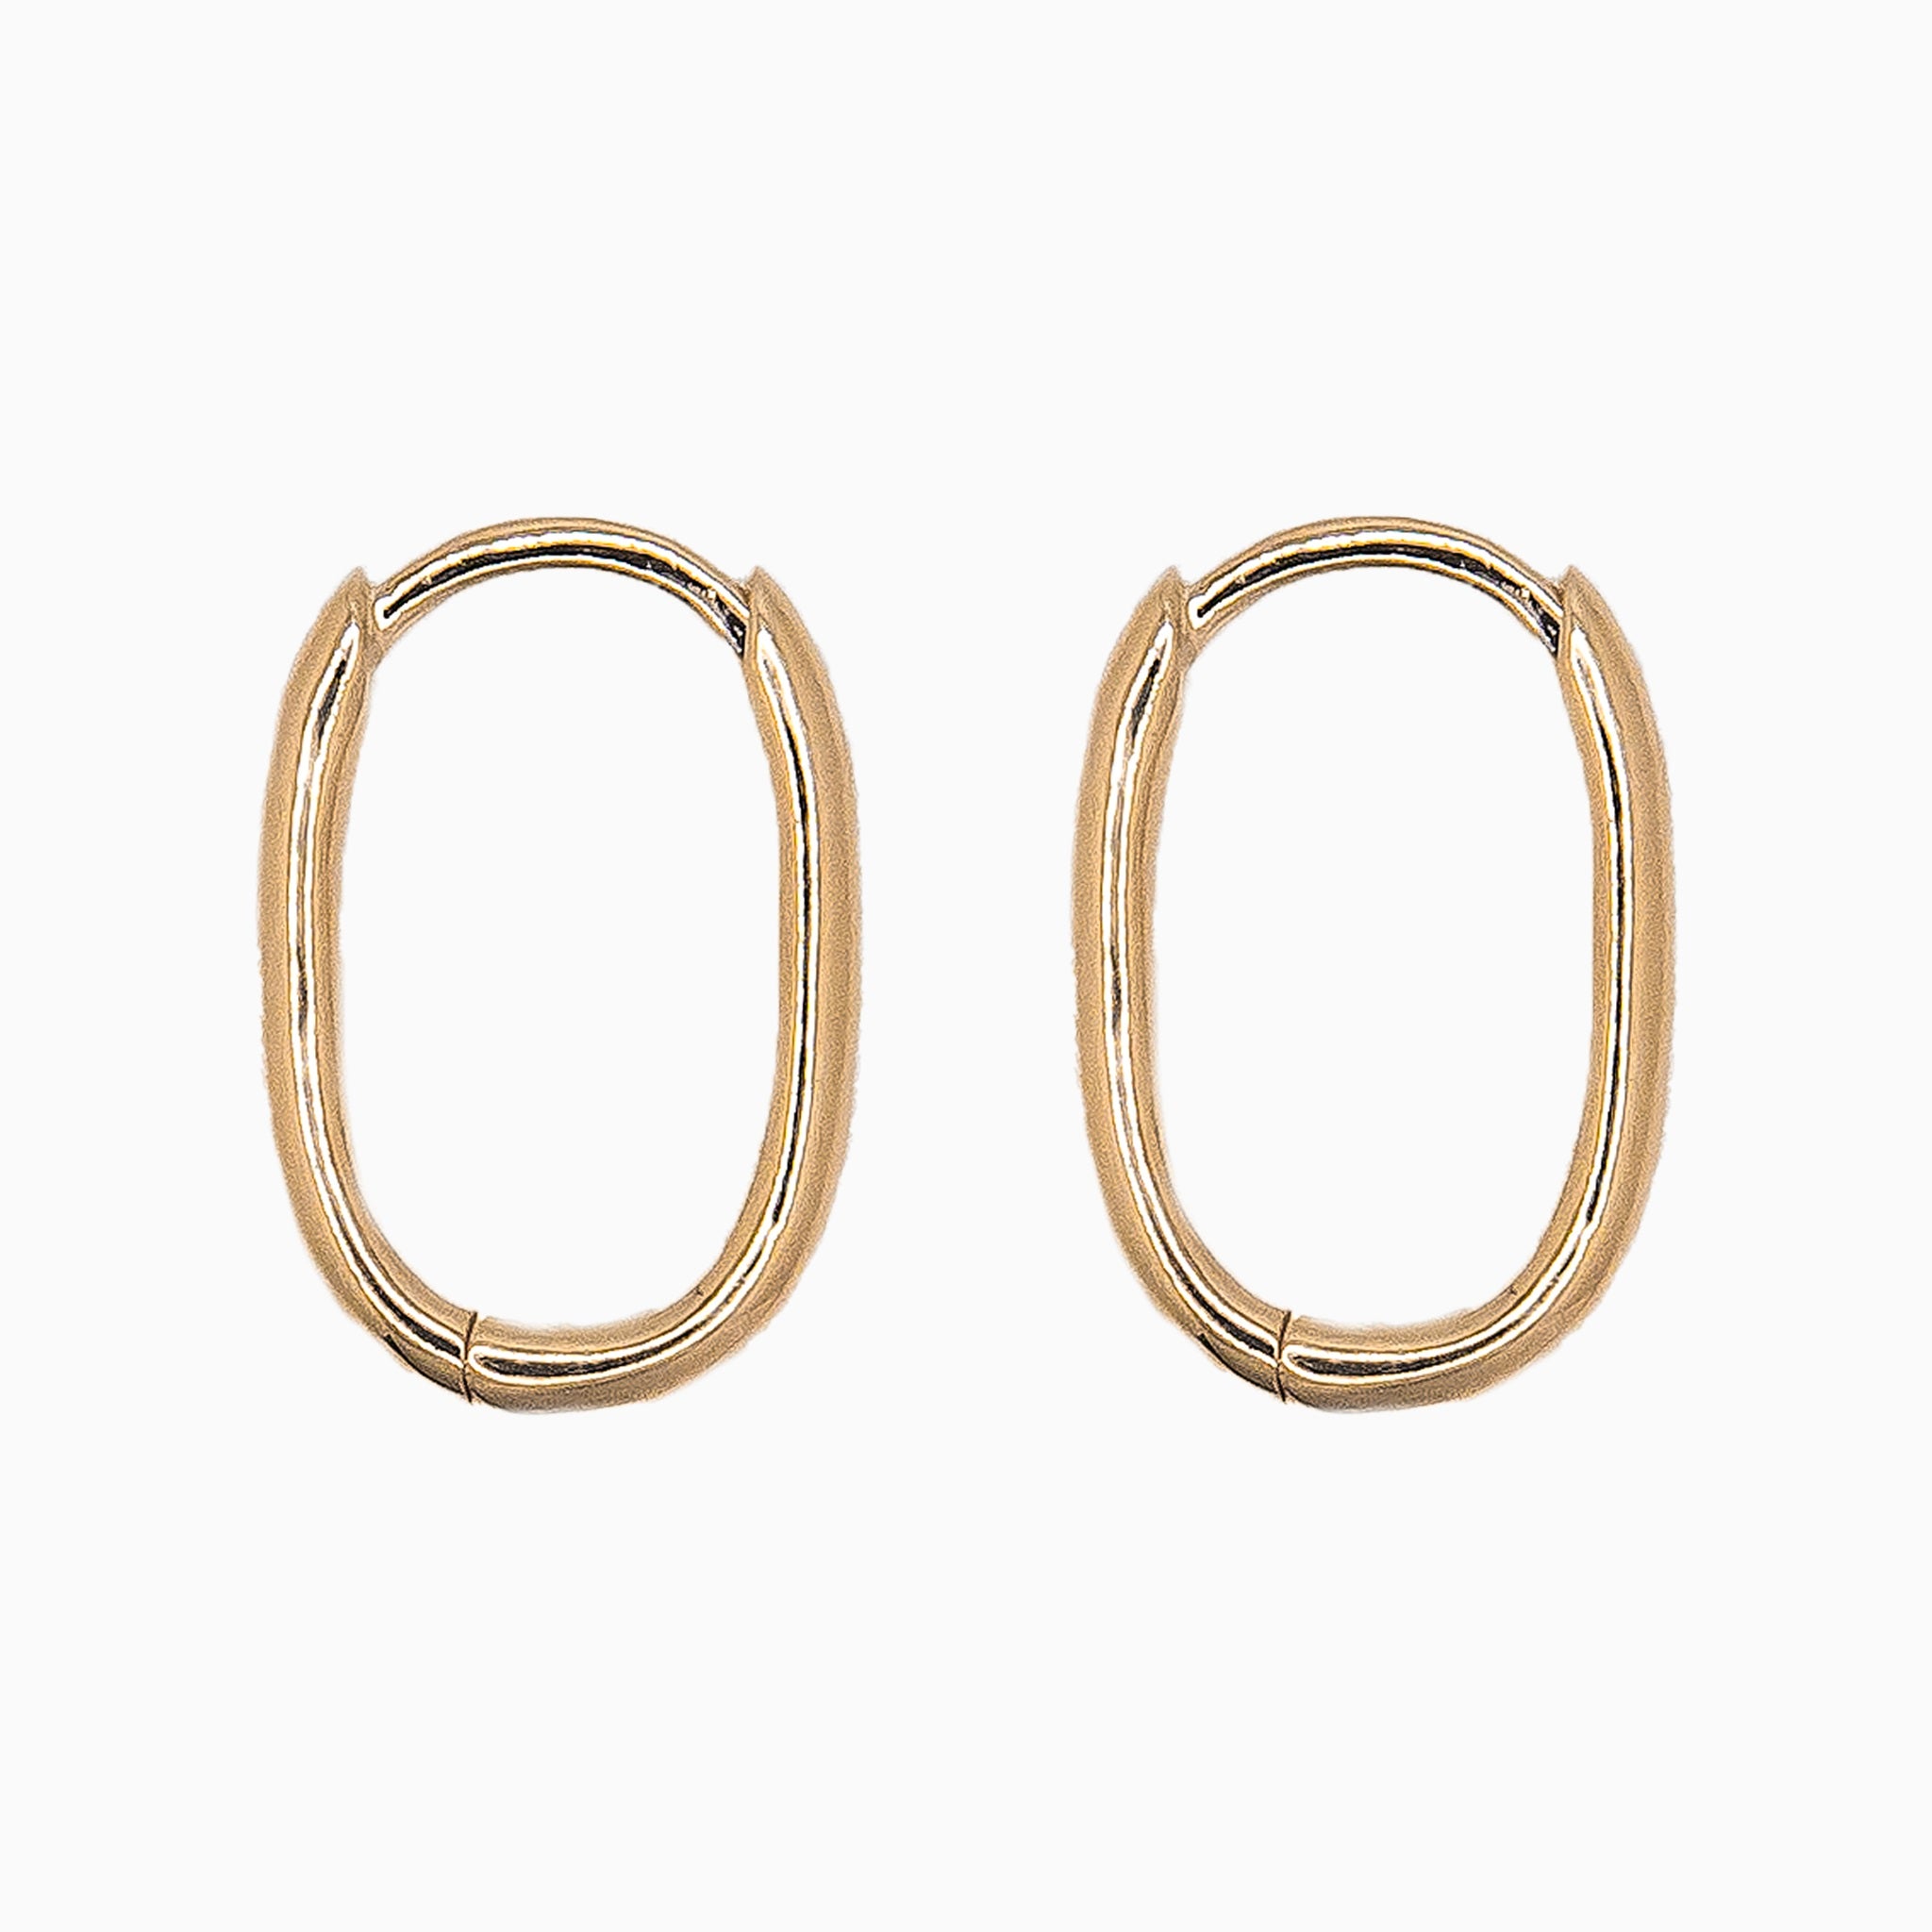 14k Yellow Gold 15mm x 10mm Hinged Everyday Oval Hoop Earrings, Side View